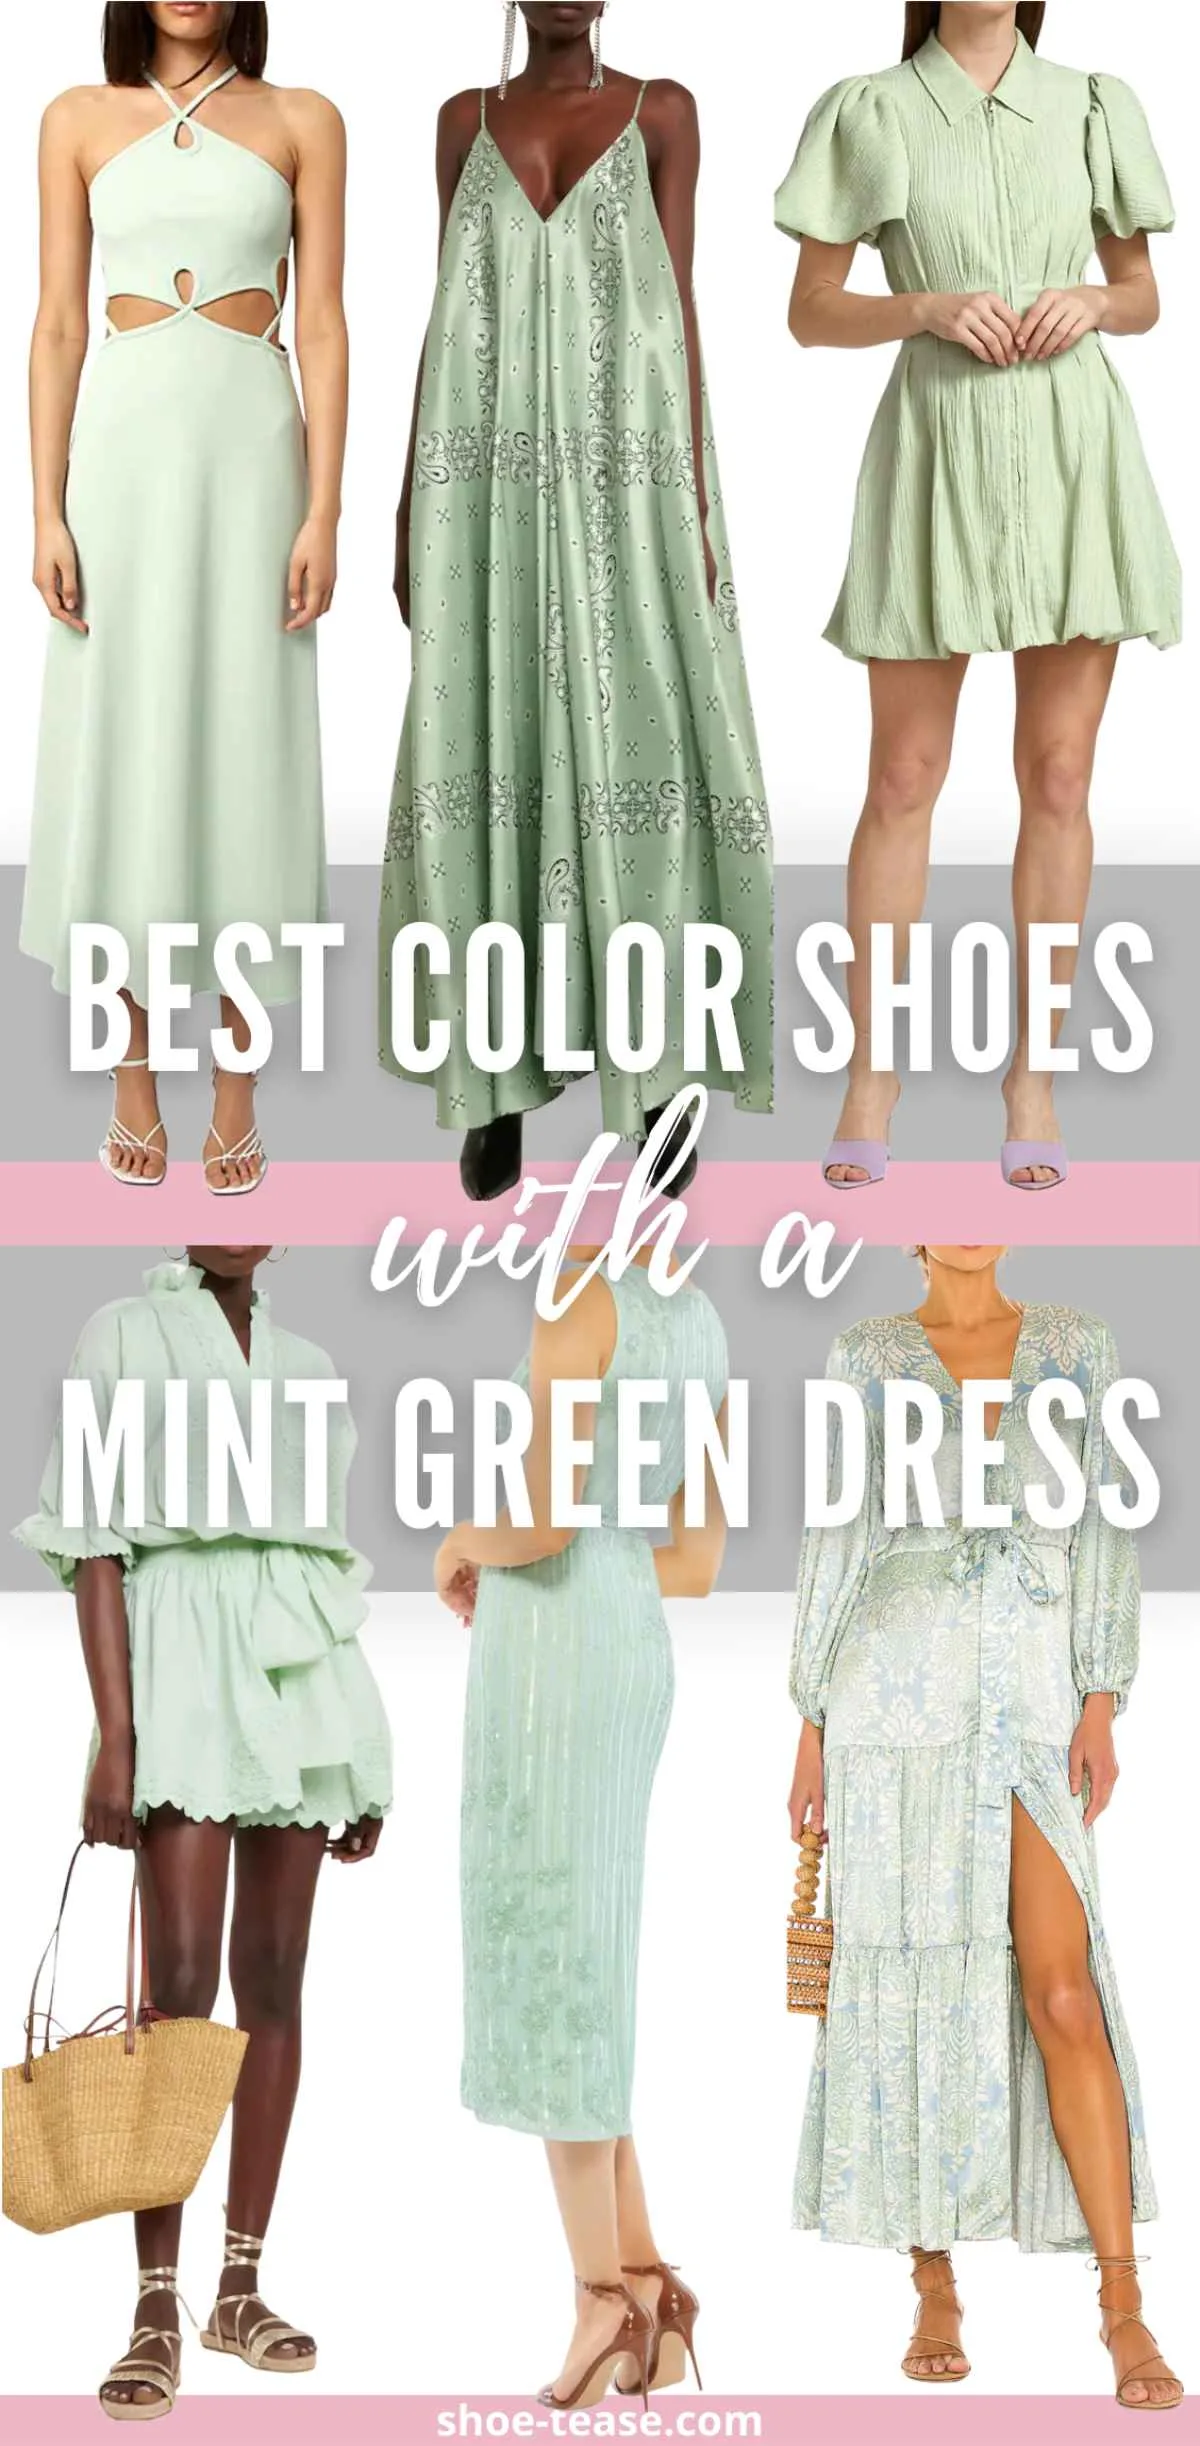 Text reading best color shoes with a mint green dress over 6 women wearing differnent mint green dress outfits.